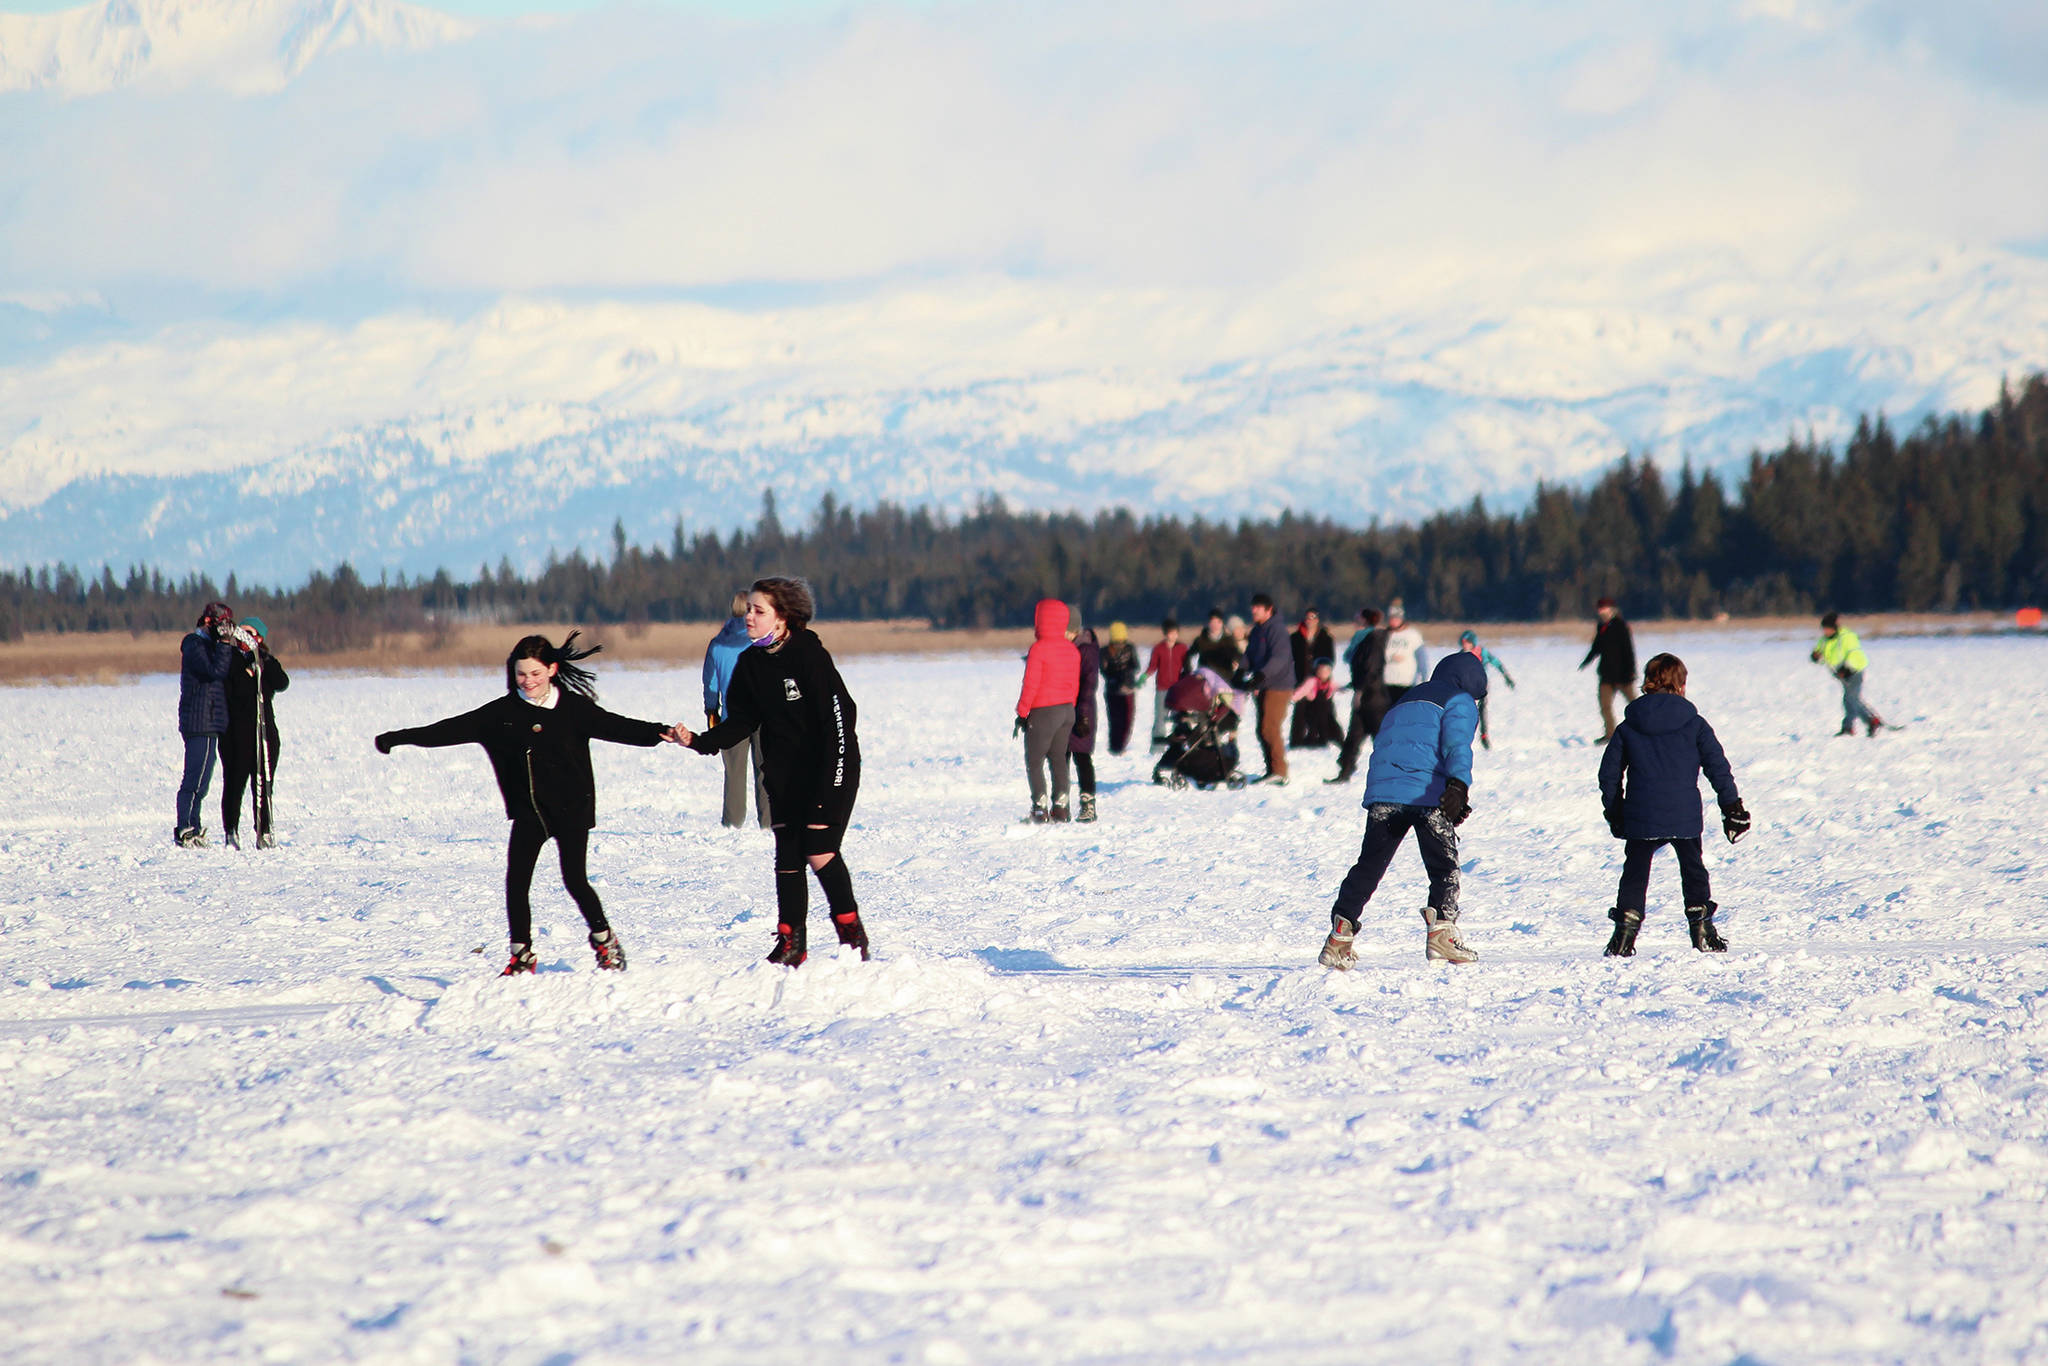 Friends and families skate along several paths plowed onto Beluga Lake for the Skate the Lake event Saturday, Feb. 6, 2021 in Homer, Alaska. It was hosted for the community by the Homer Hockey Association. (Photo by Megan Pacer/Homer News)